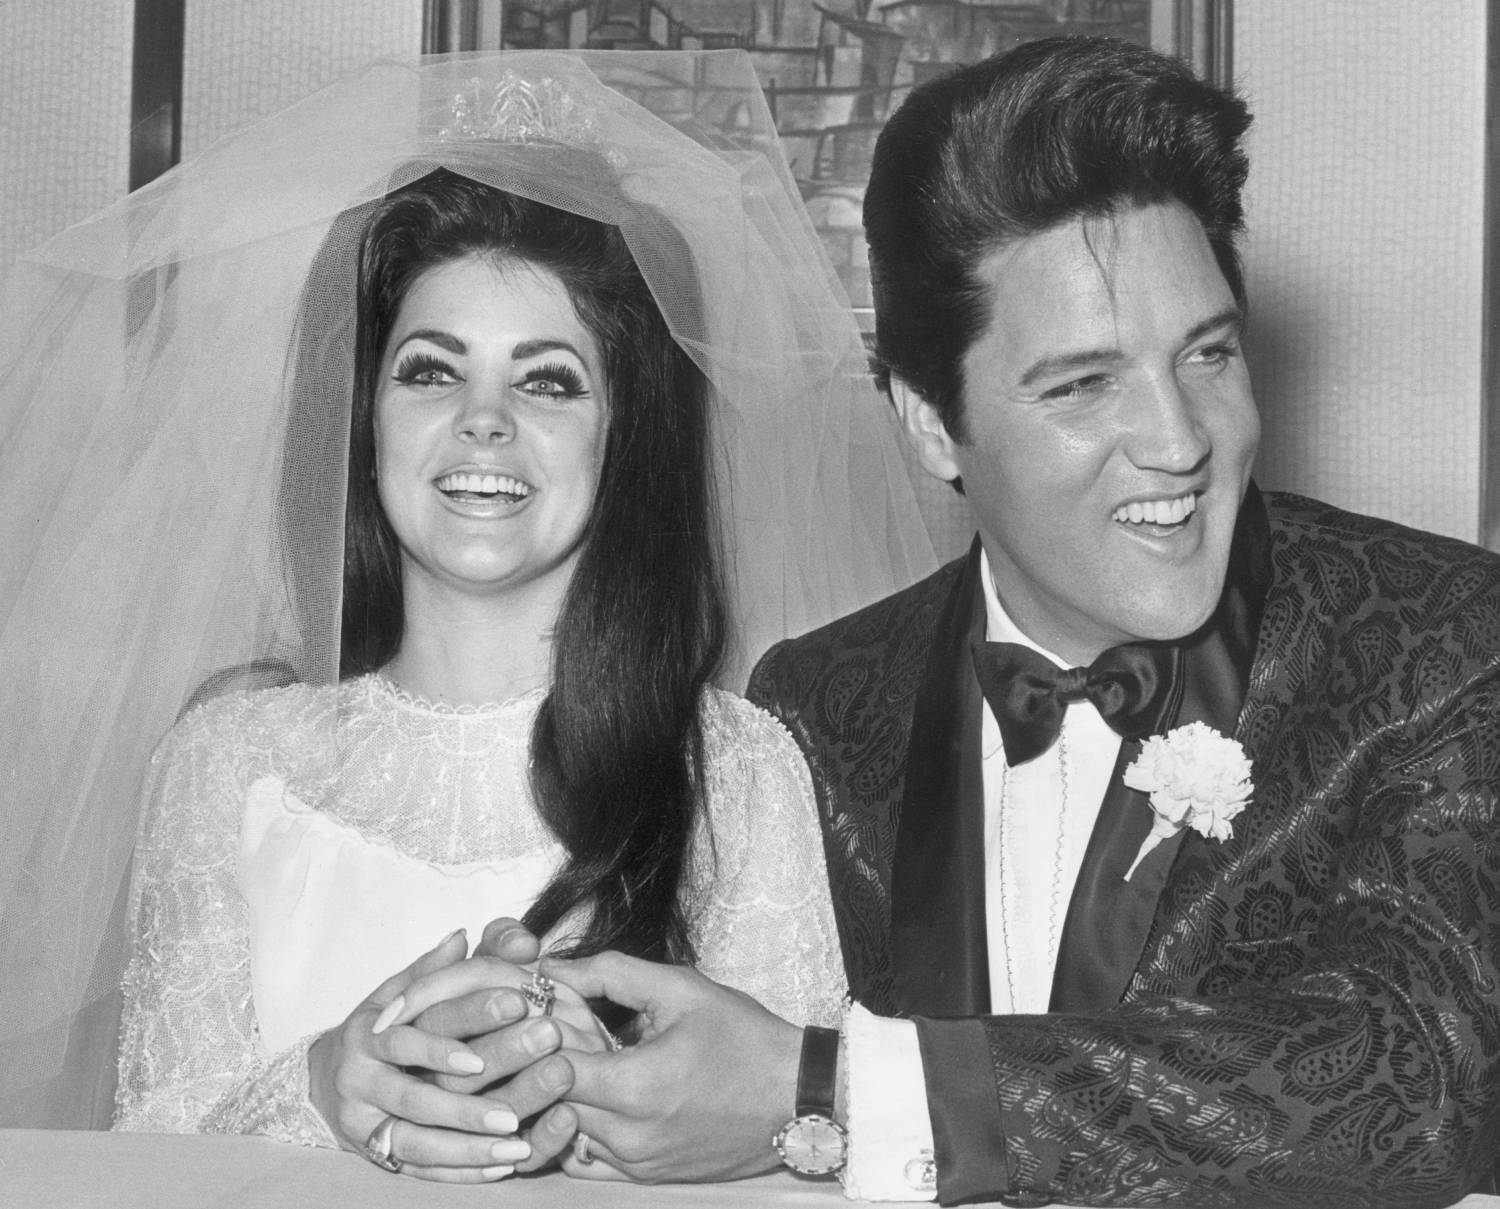 Rock and roll singer and actor Elvis Presley (1935 - 1977) holding hands with his bride, Priscilla Beaulieu Presley, on their wedding day, Las Vegas, Nevada.